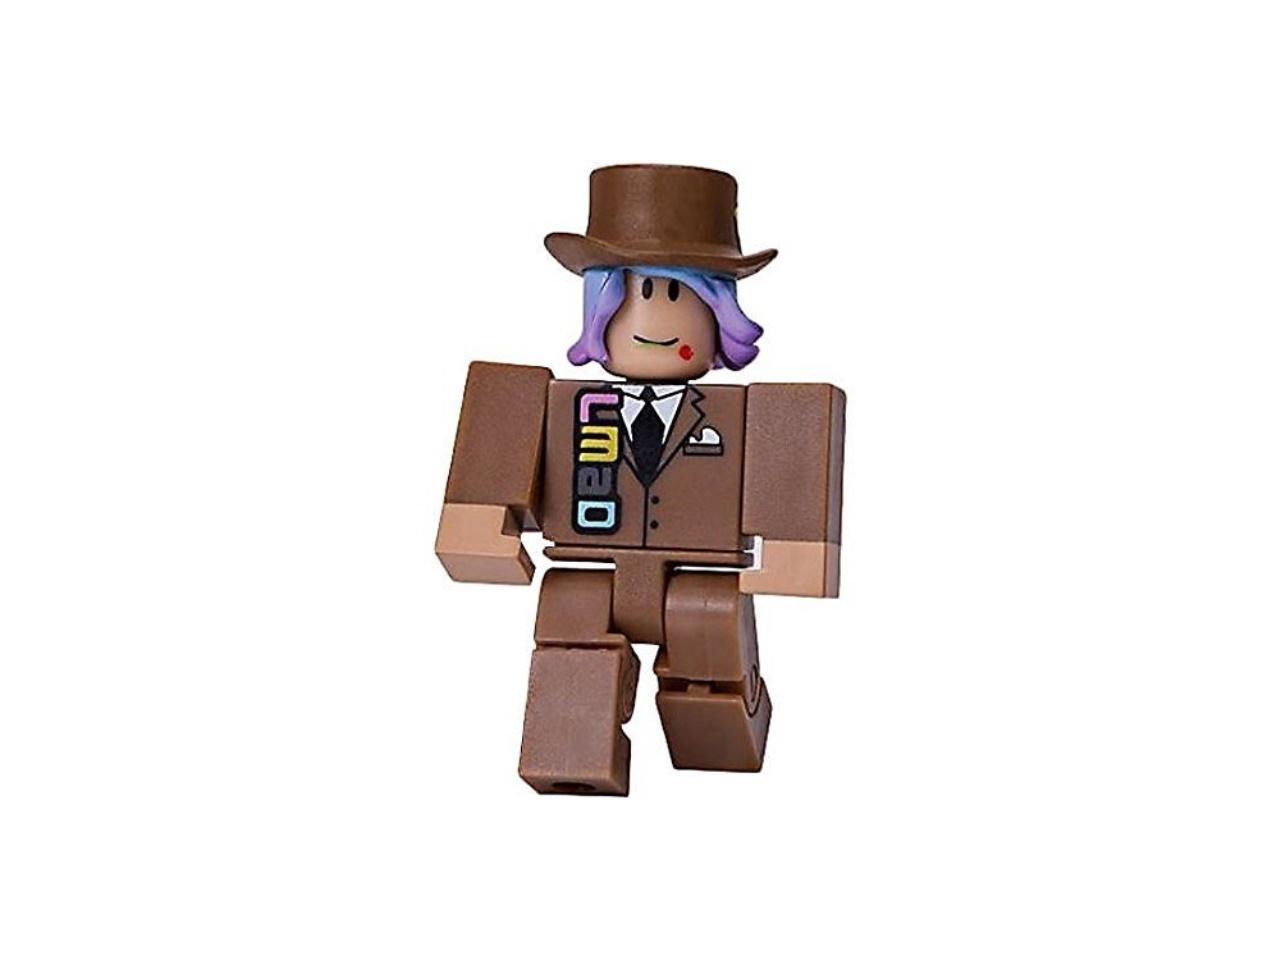 Roblox Series 1 Let S Make A Deal Action Figure Mystery Box Virtual Item Code 2 5 Newegg Com - roblox series 2 toolkit figure carry case with core packs review youtube